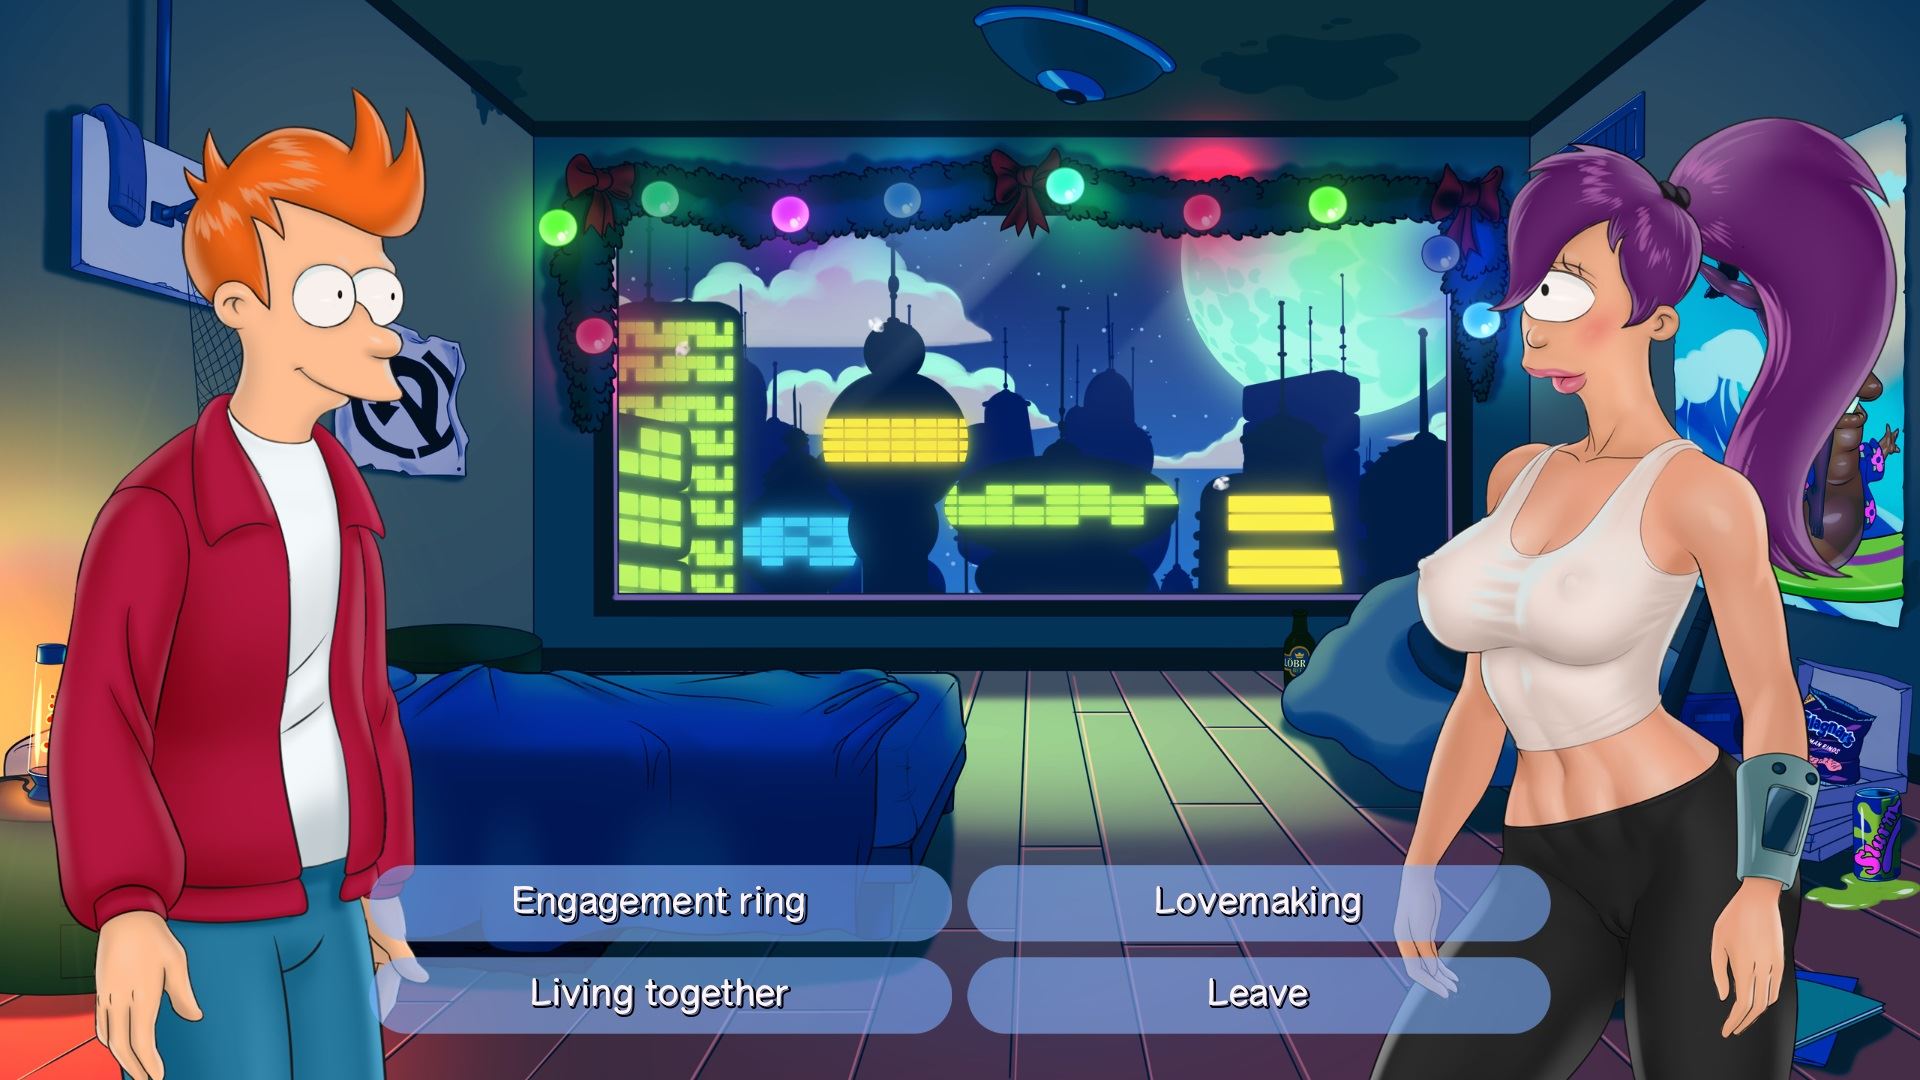 Free Futurama Porn Games - Futurama: Lust in Space Ren'Py Porn Sex Game v.0.19.9 Download for Windows,  MacOS, Linux